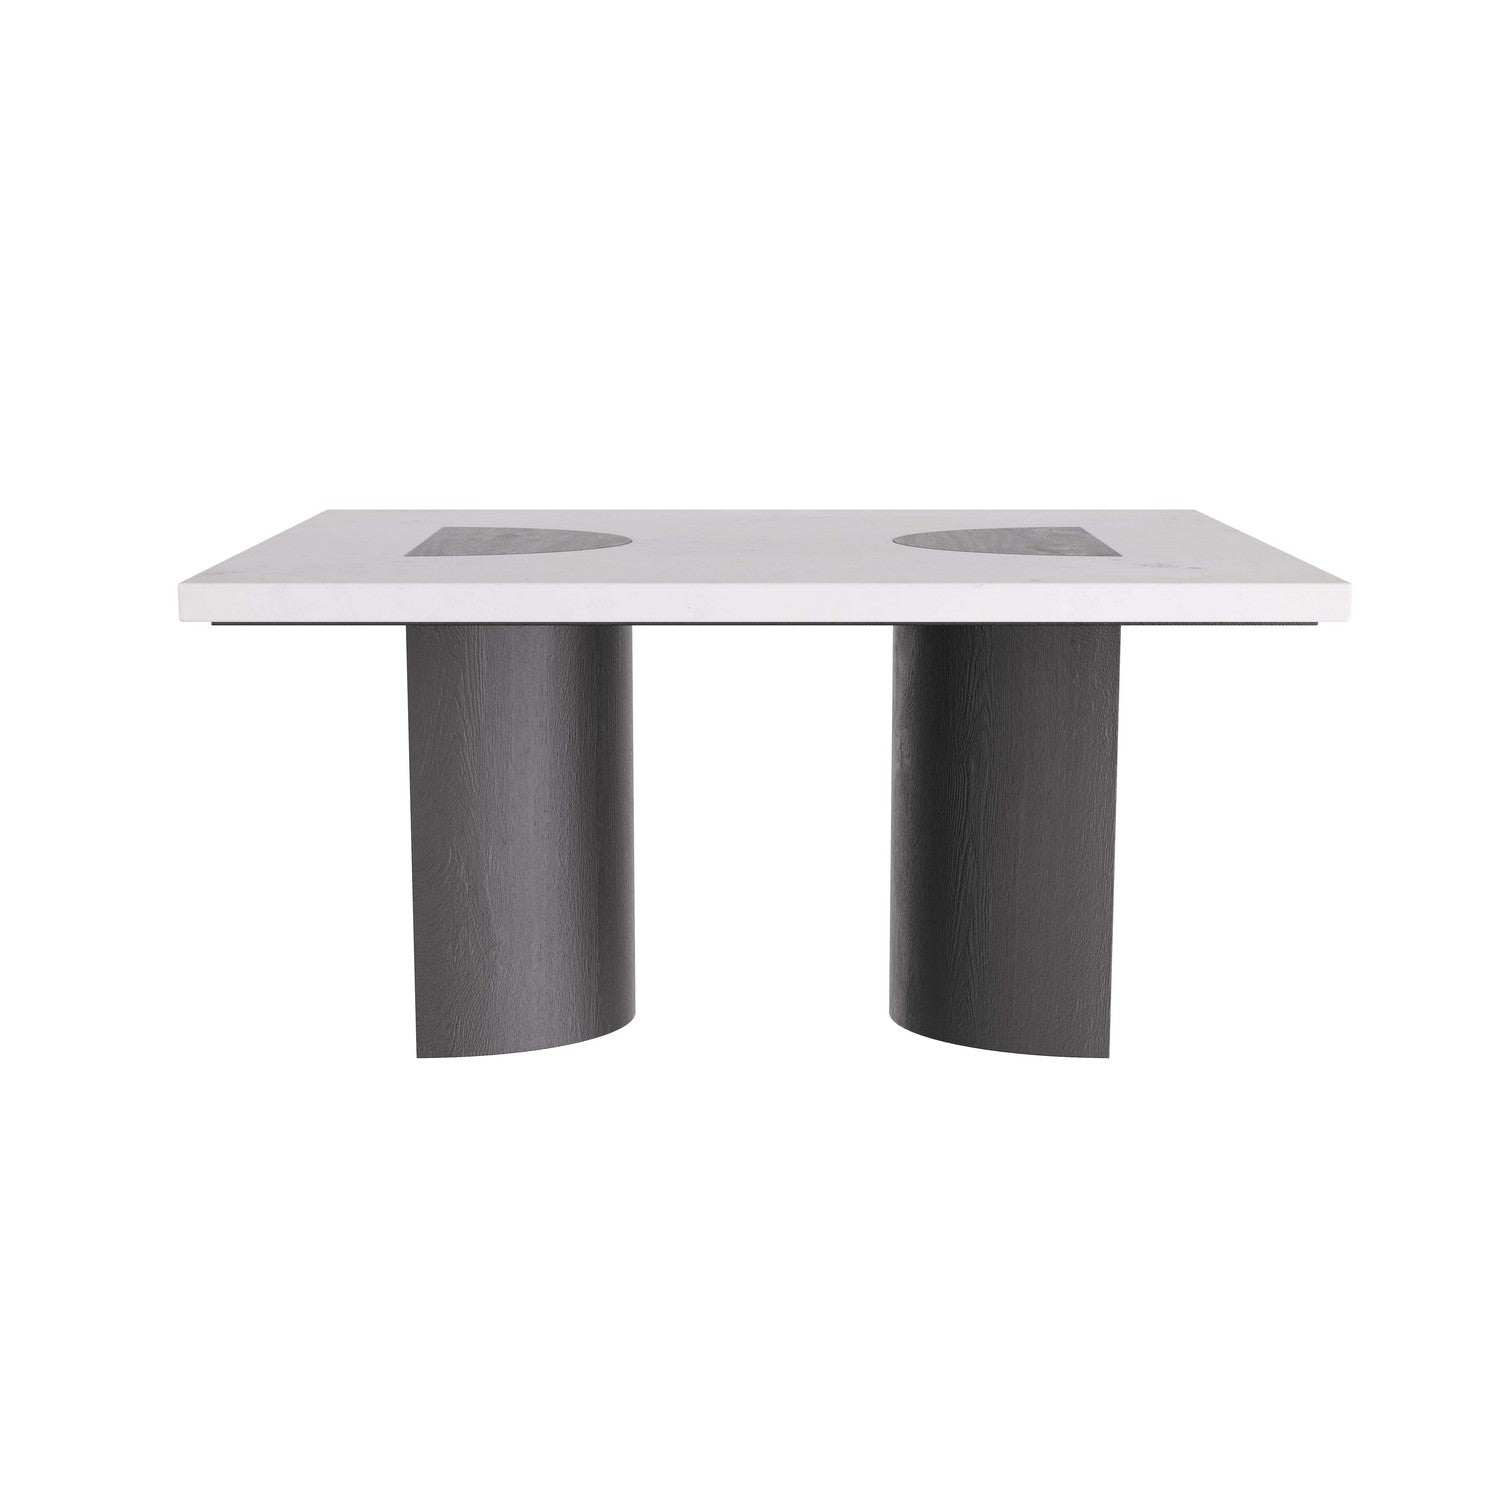 Cocktail Table from the Tindle collection in White Sandblasted finish